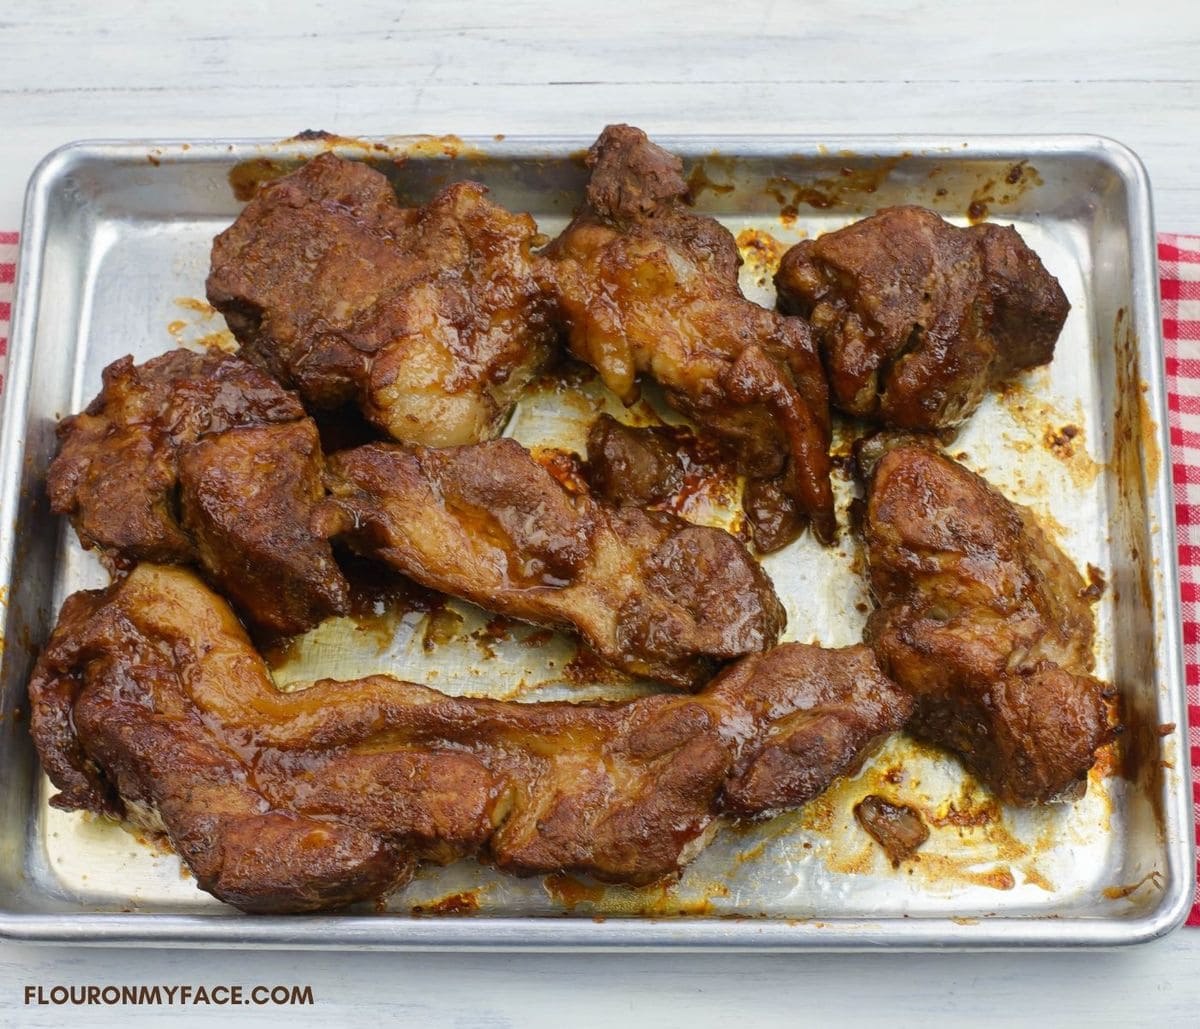 Overhead image of a baking tray with barbecued country style pork ribs that have been pressure cooked.